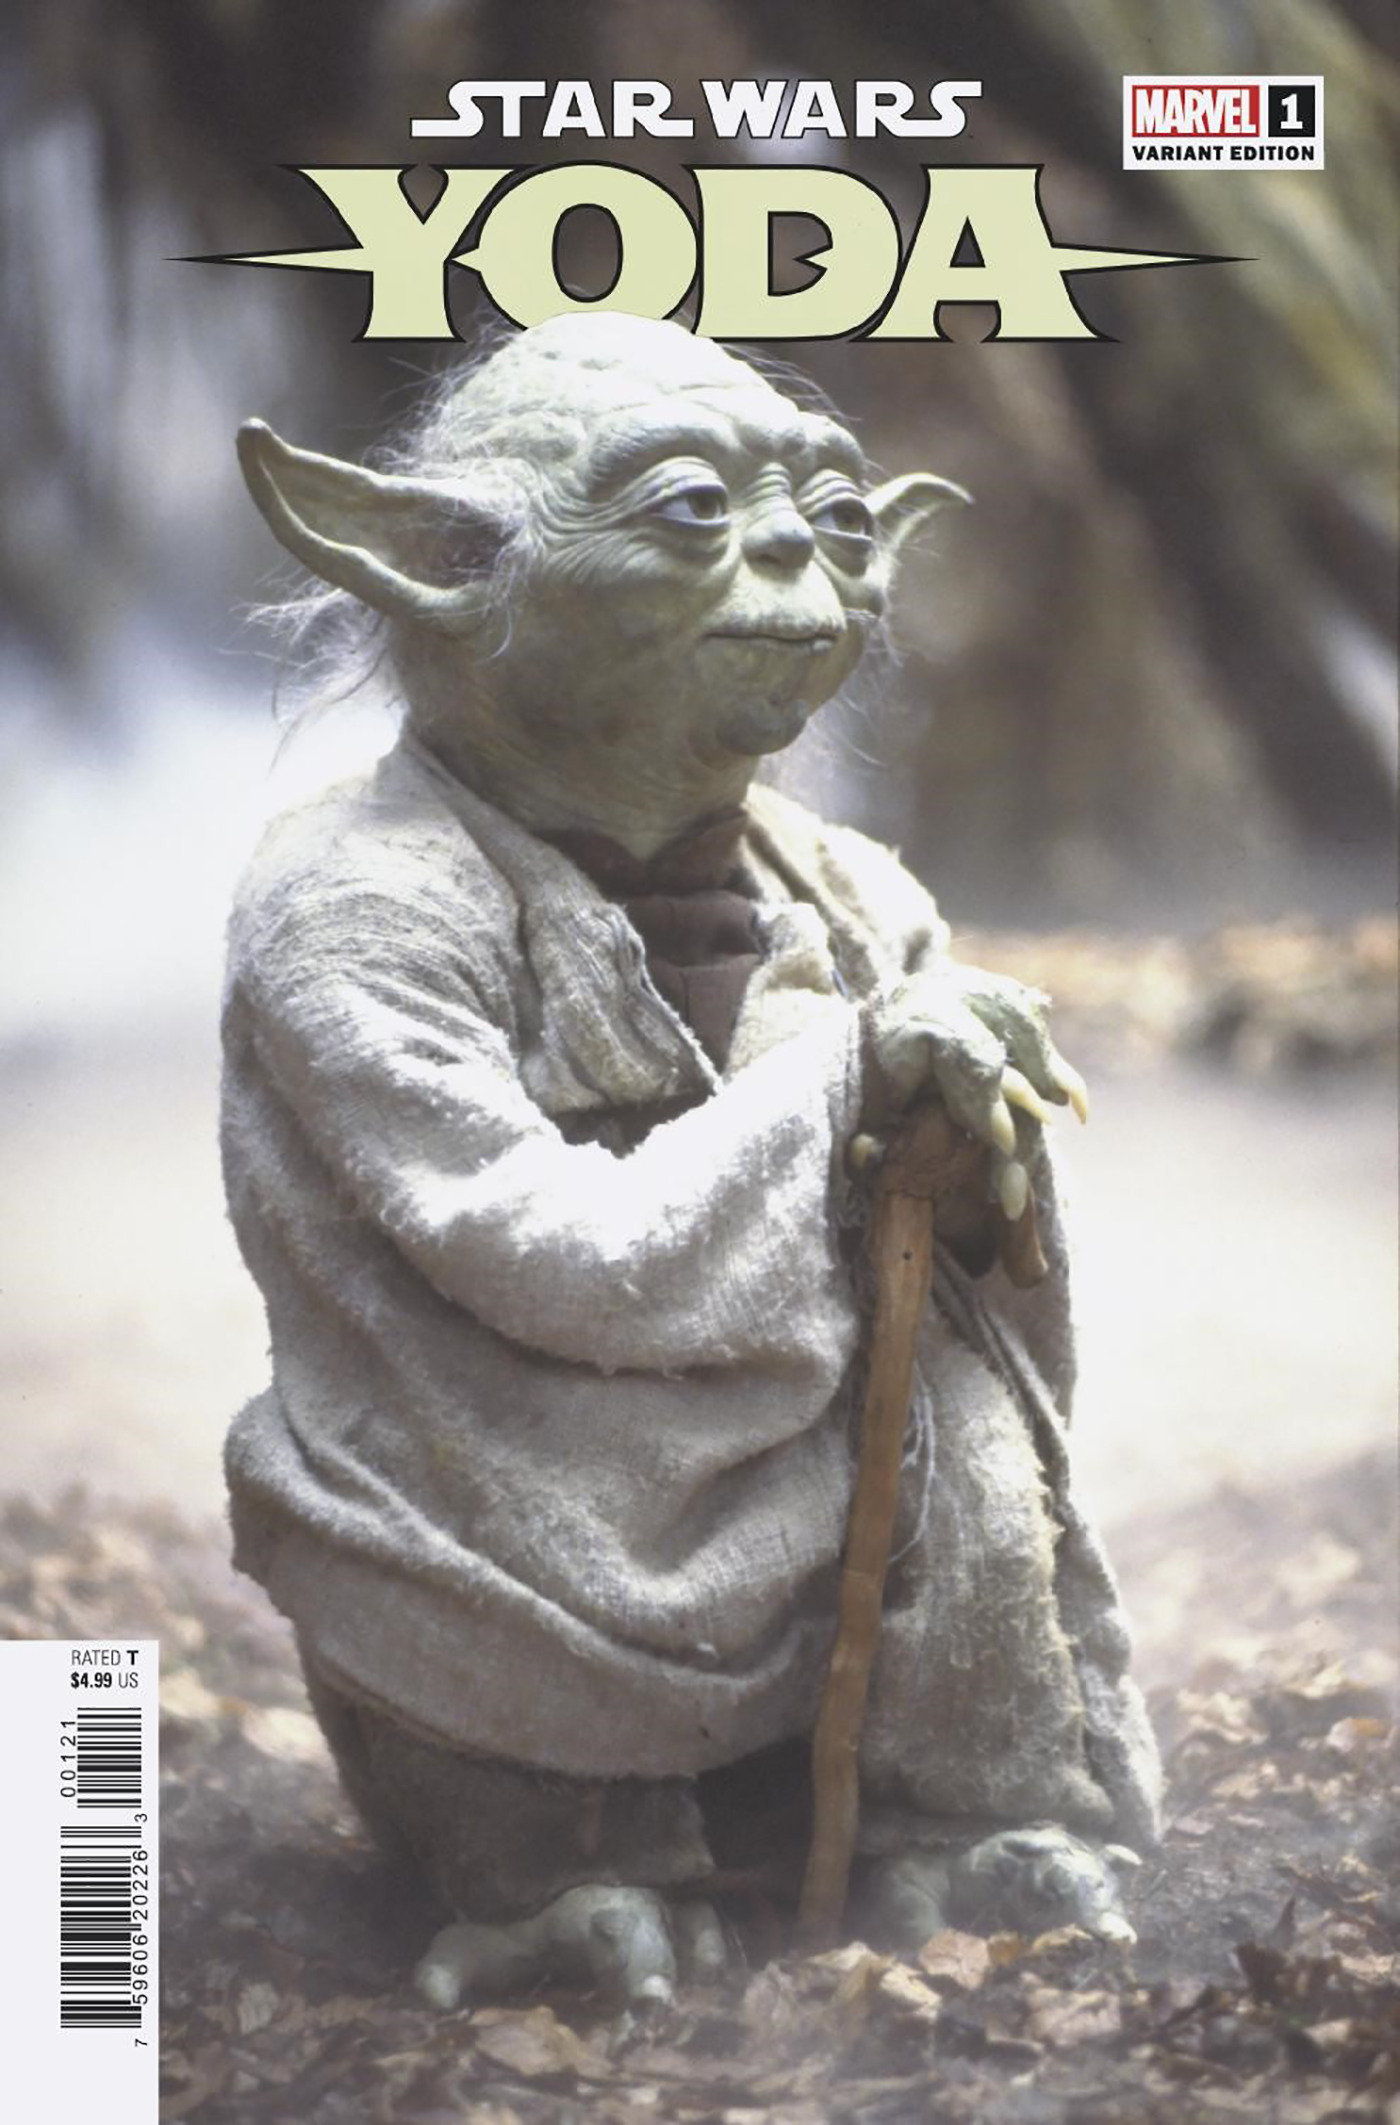 Star Wars: Yoda #1 1 for 10 Incentive Movie Variant